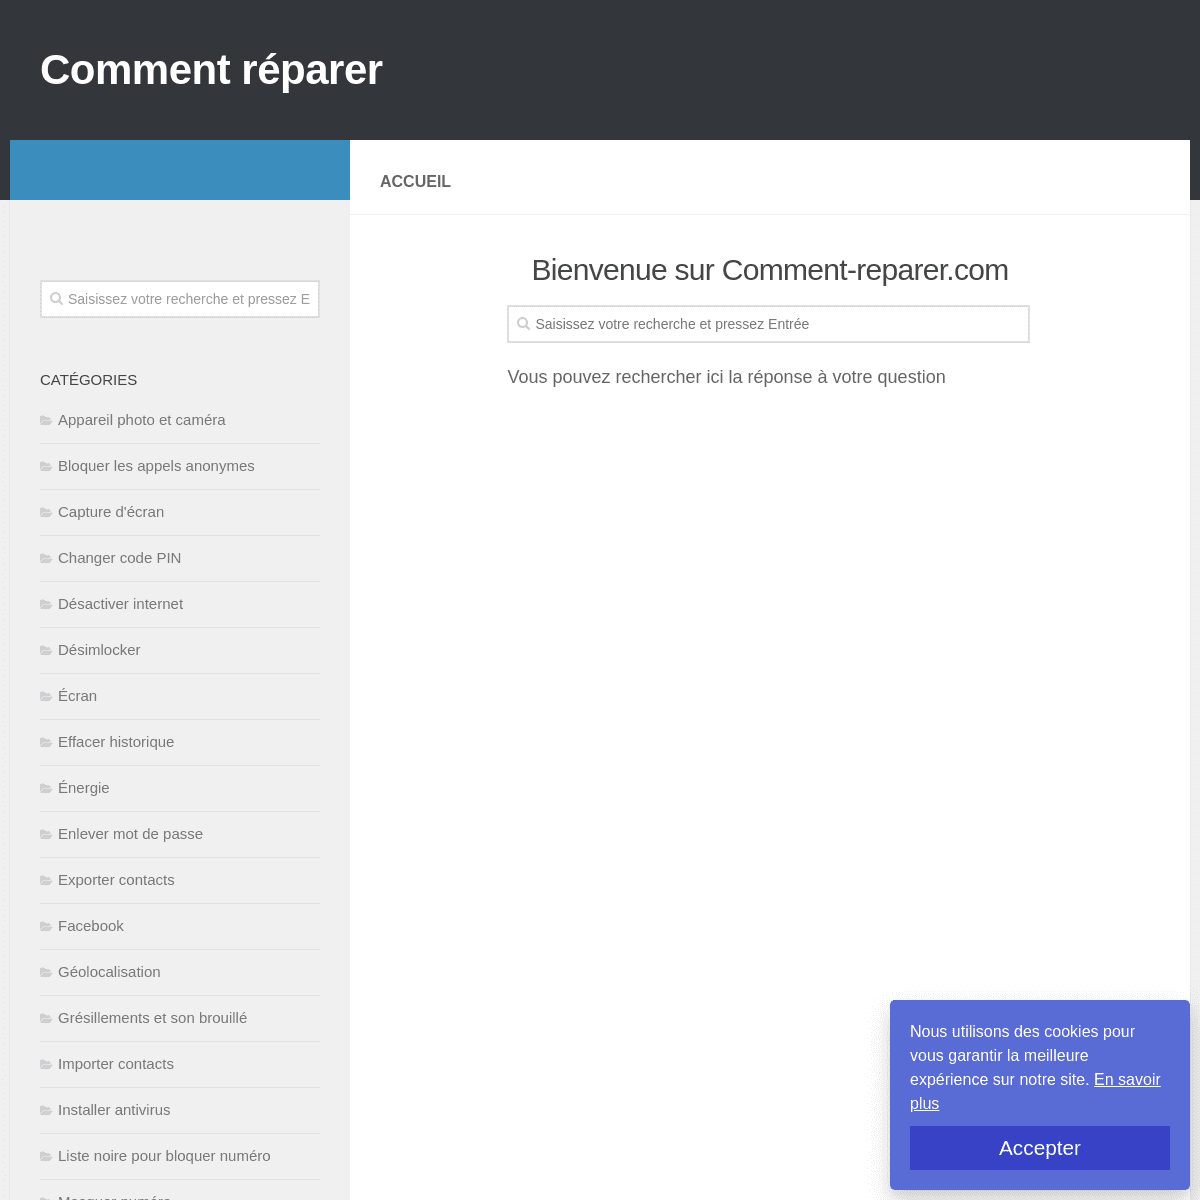 A complete backup of comment-reparer.com